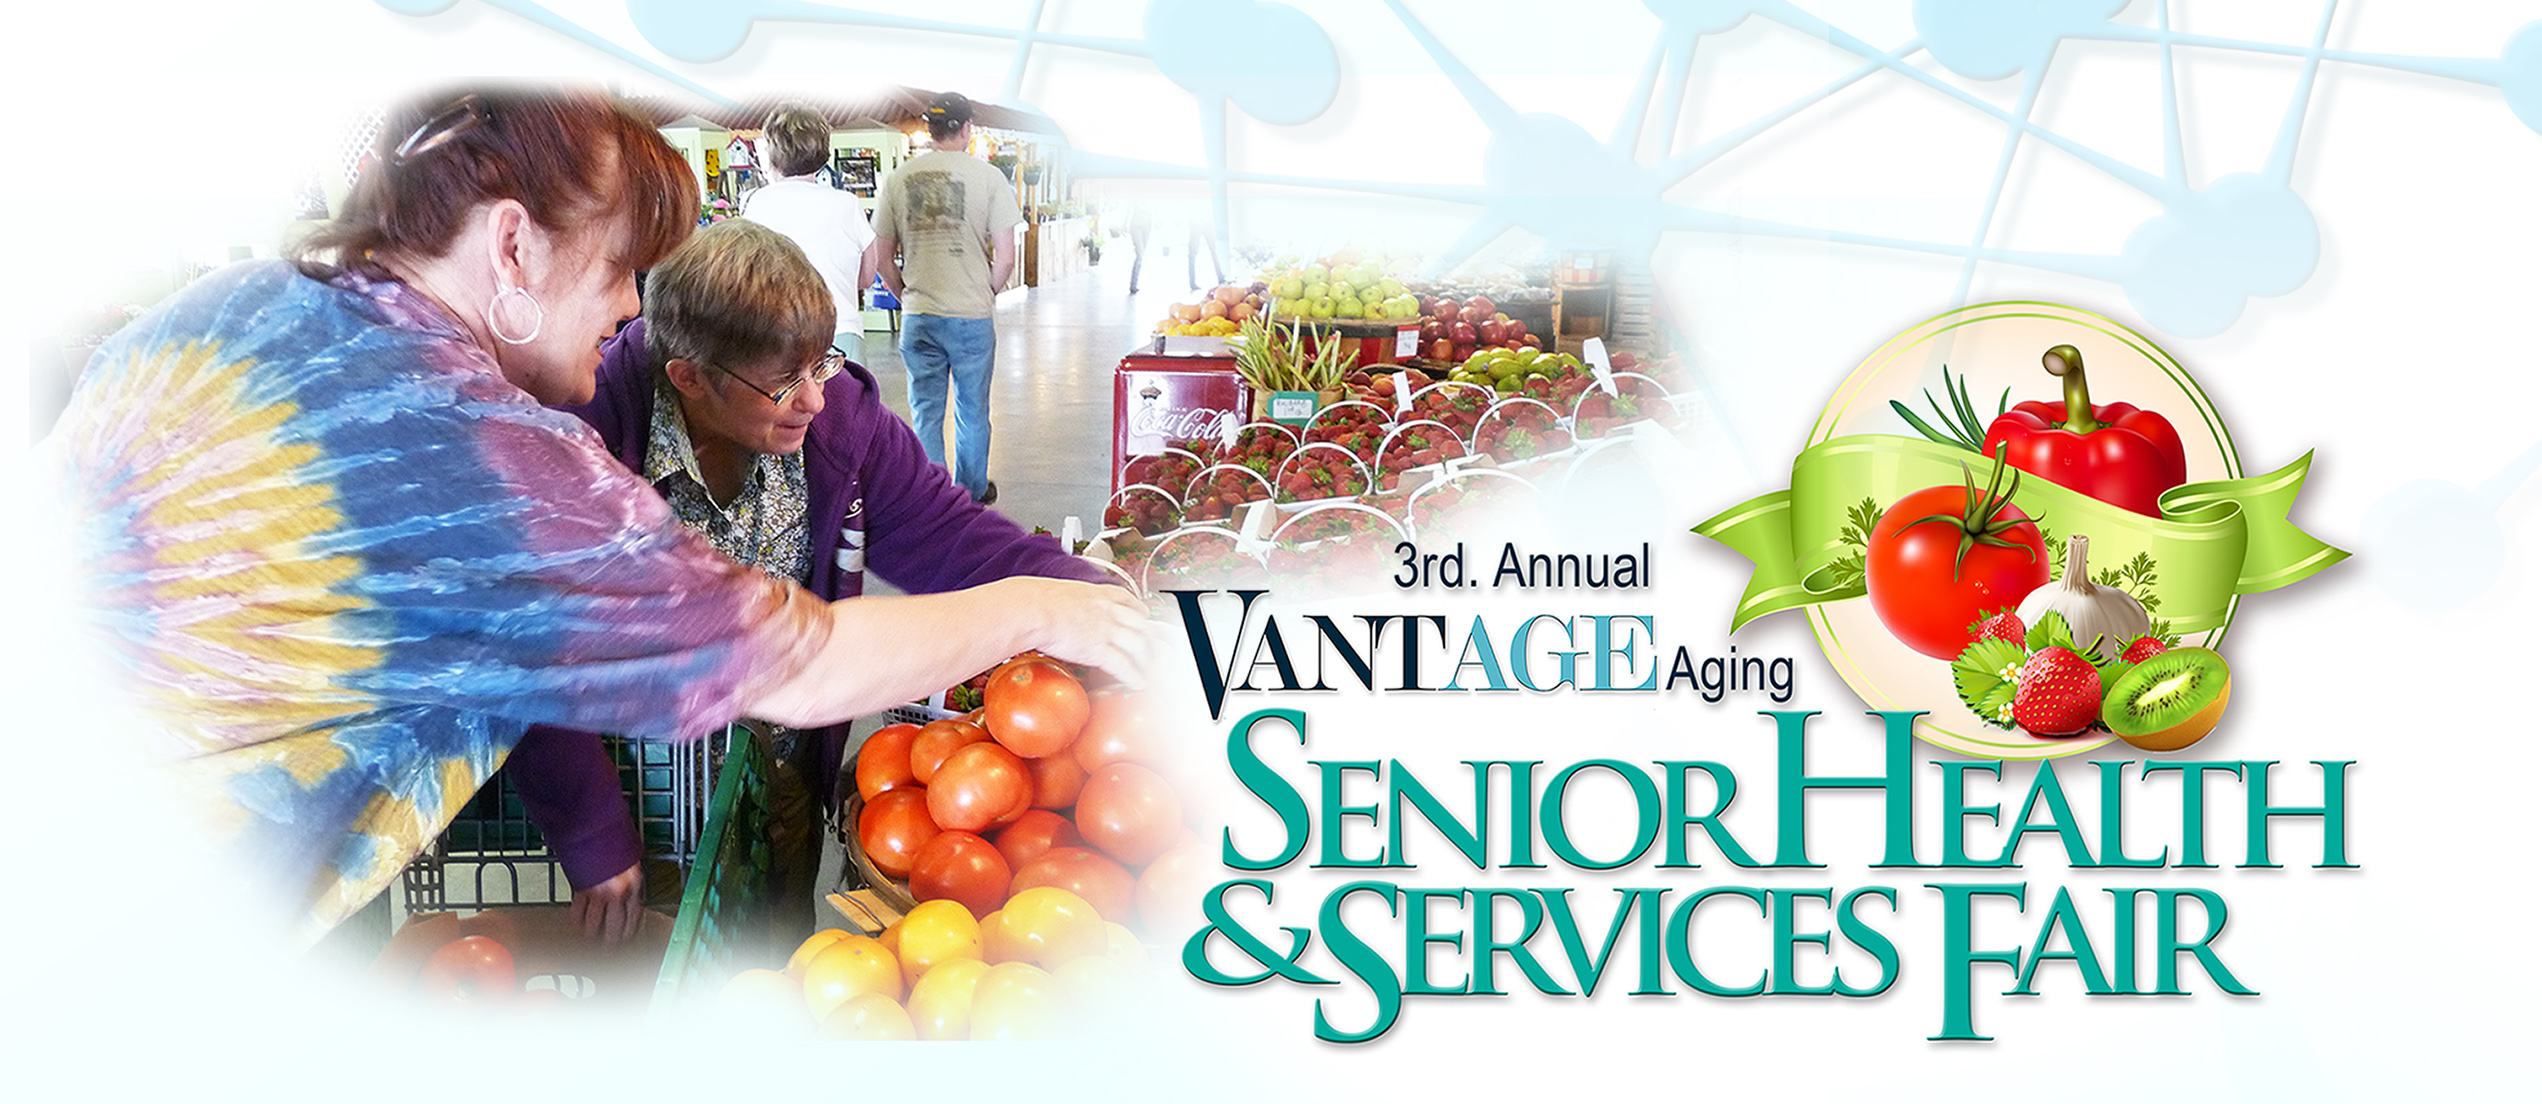 VANTAGE Aging is Hosting Senior Health & Services Fair to Promote Wellness in Aging Populations